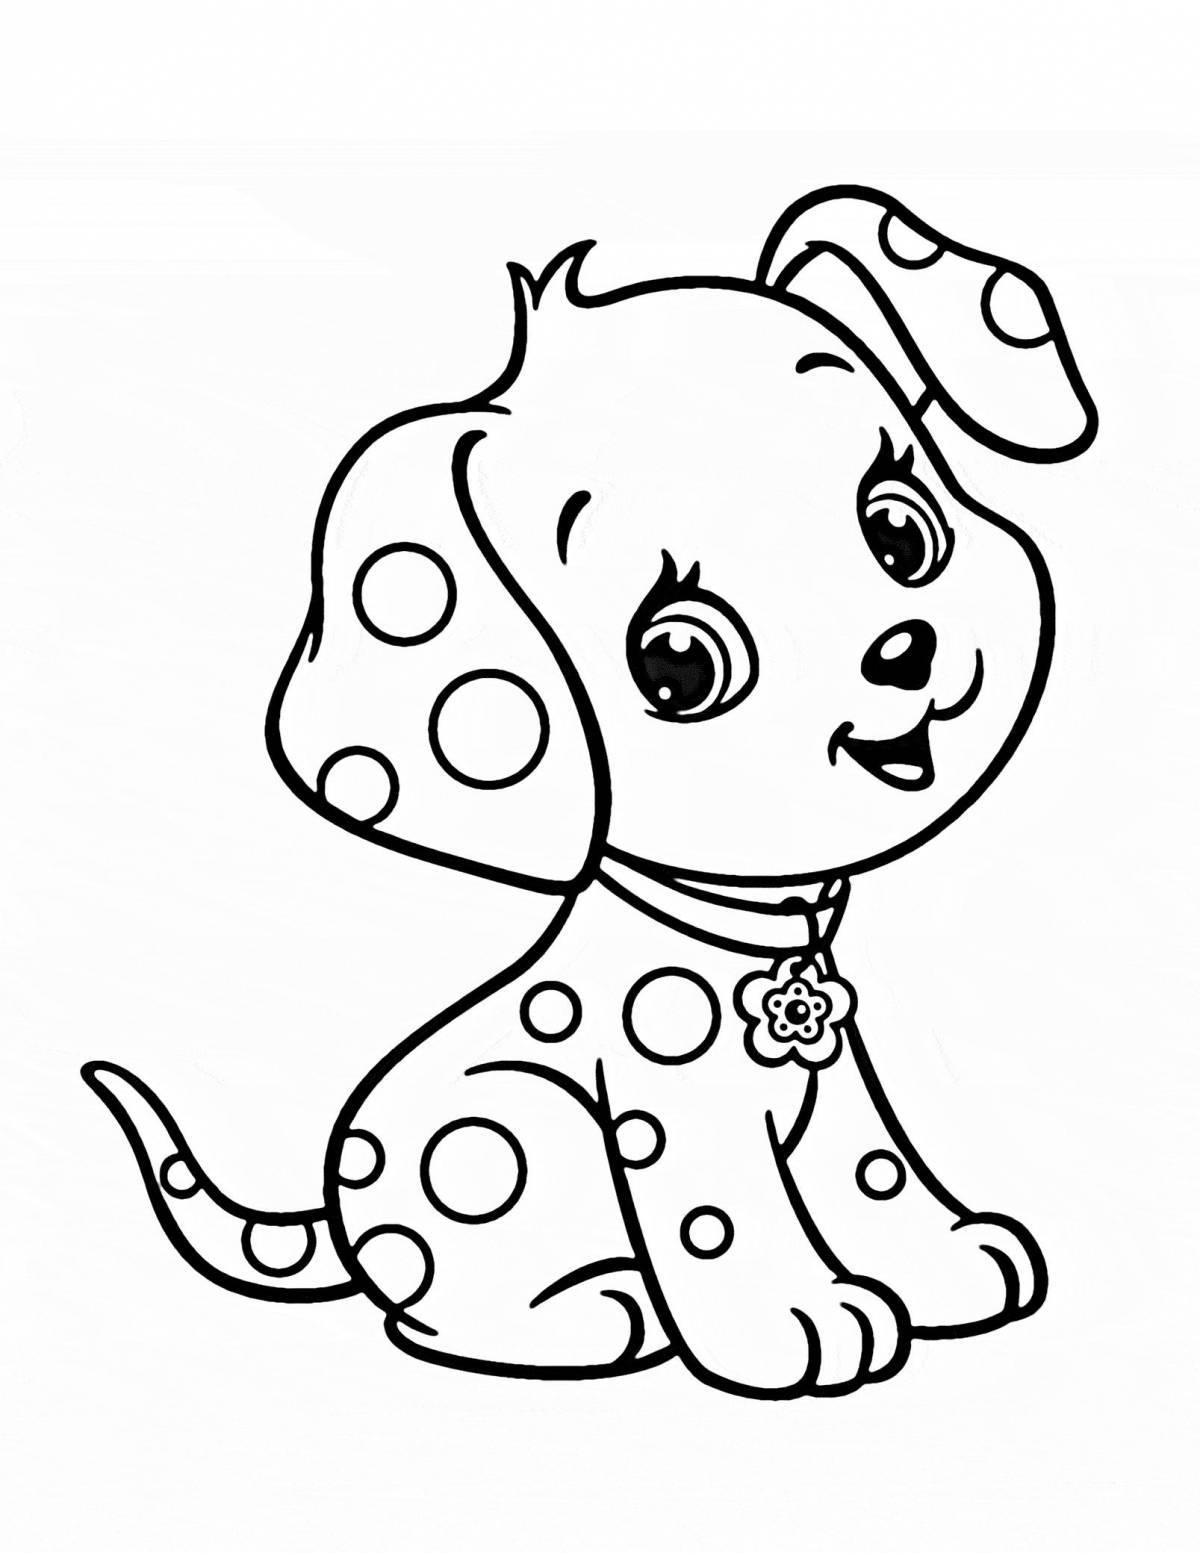 Colorful dog coloring book for kids